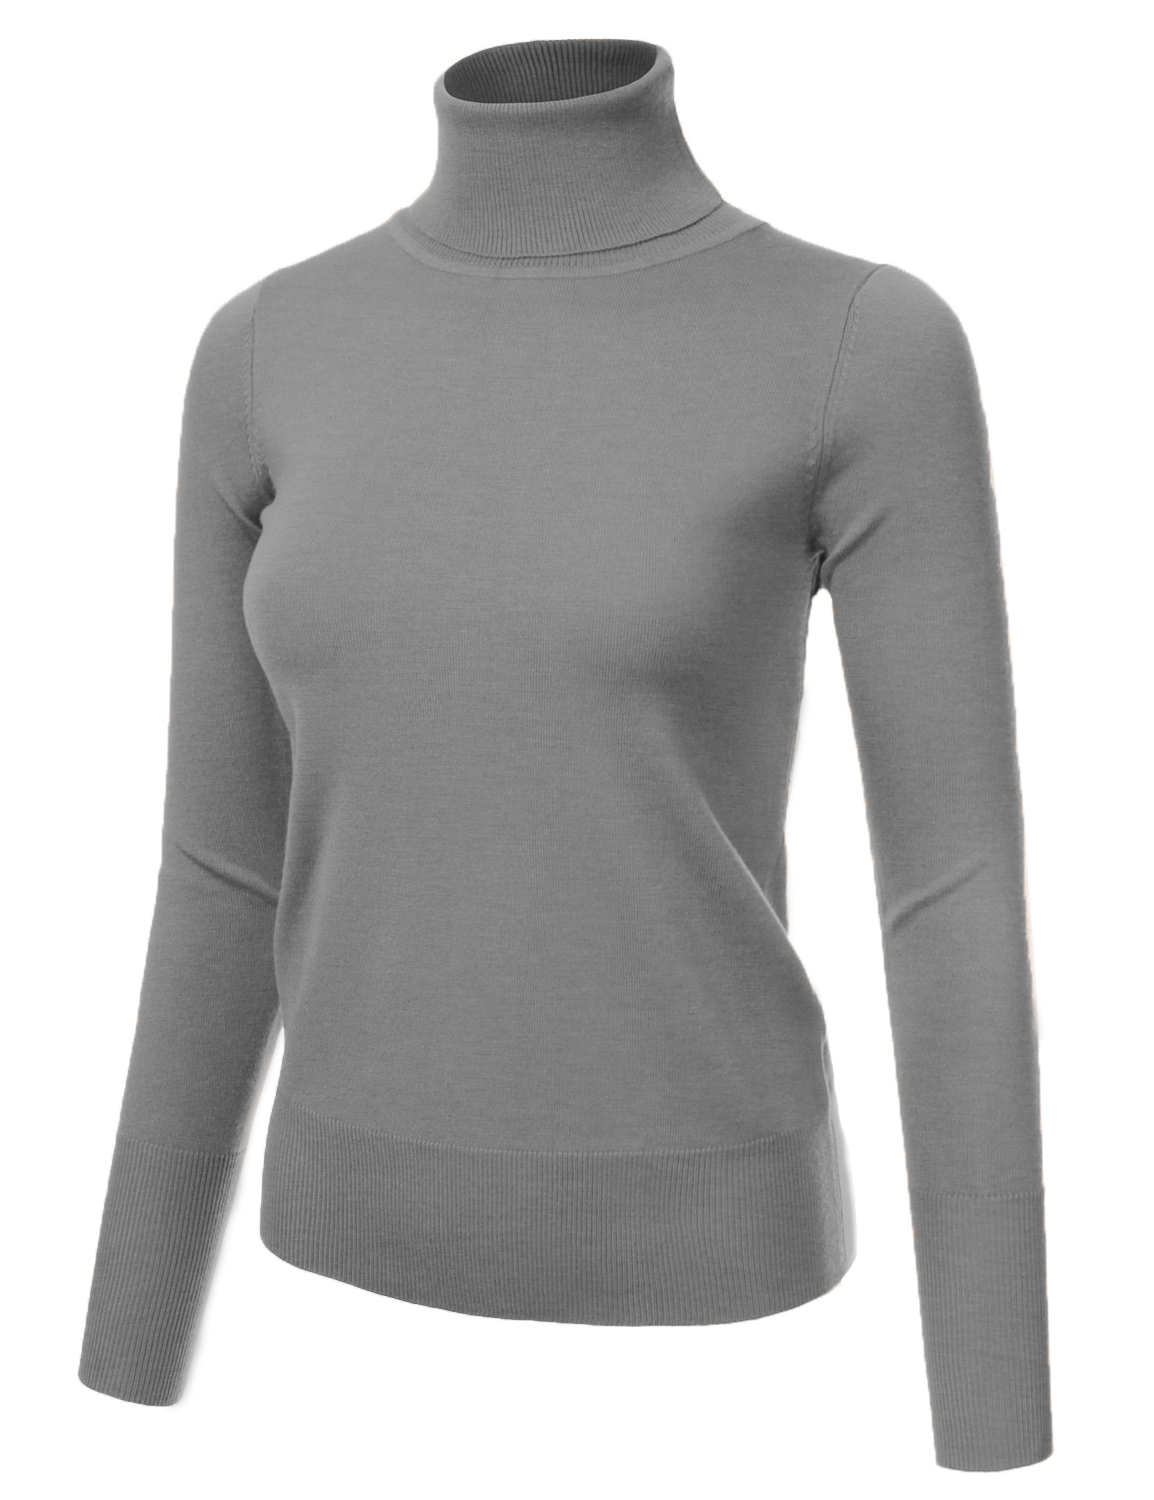 JJ Perfection Women's Stretch Knit Turtle Neck Long Sleeve Pullover ...